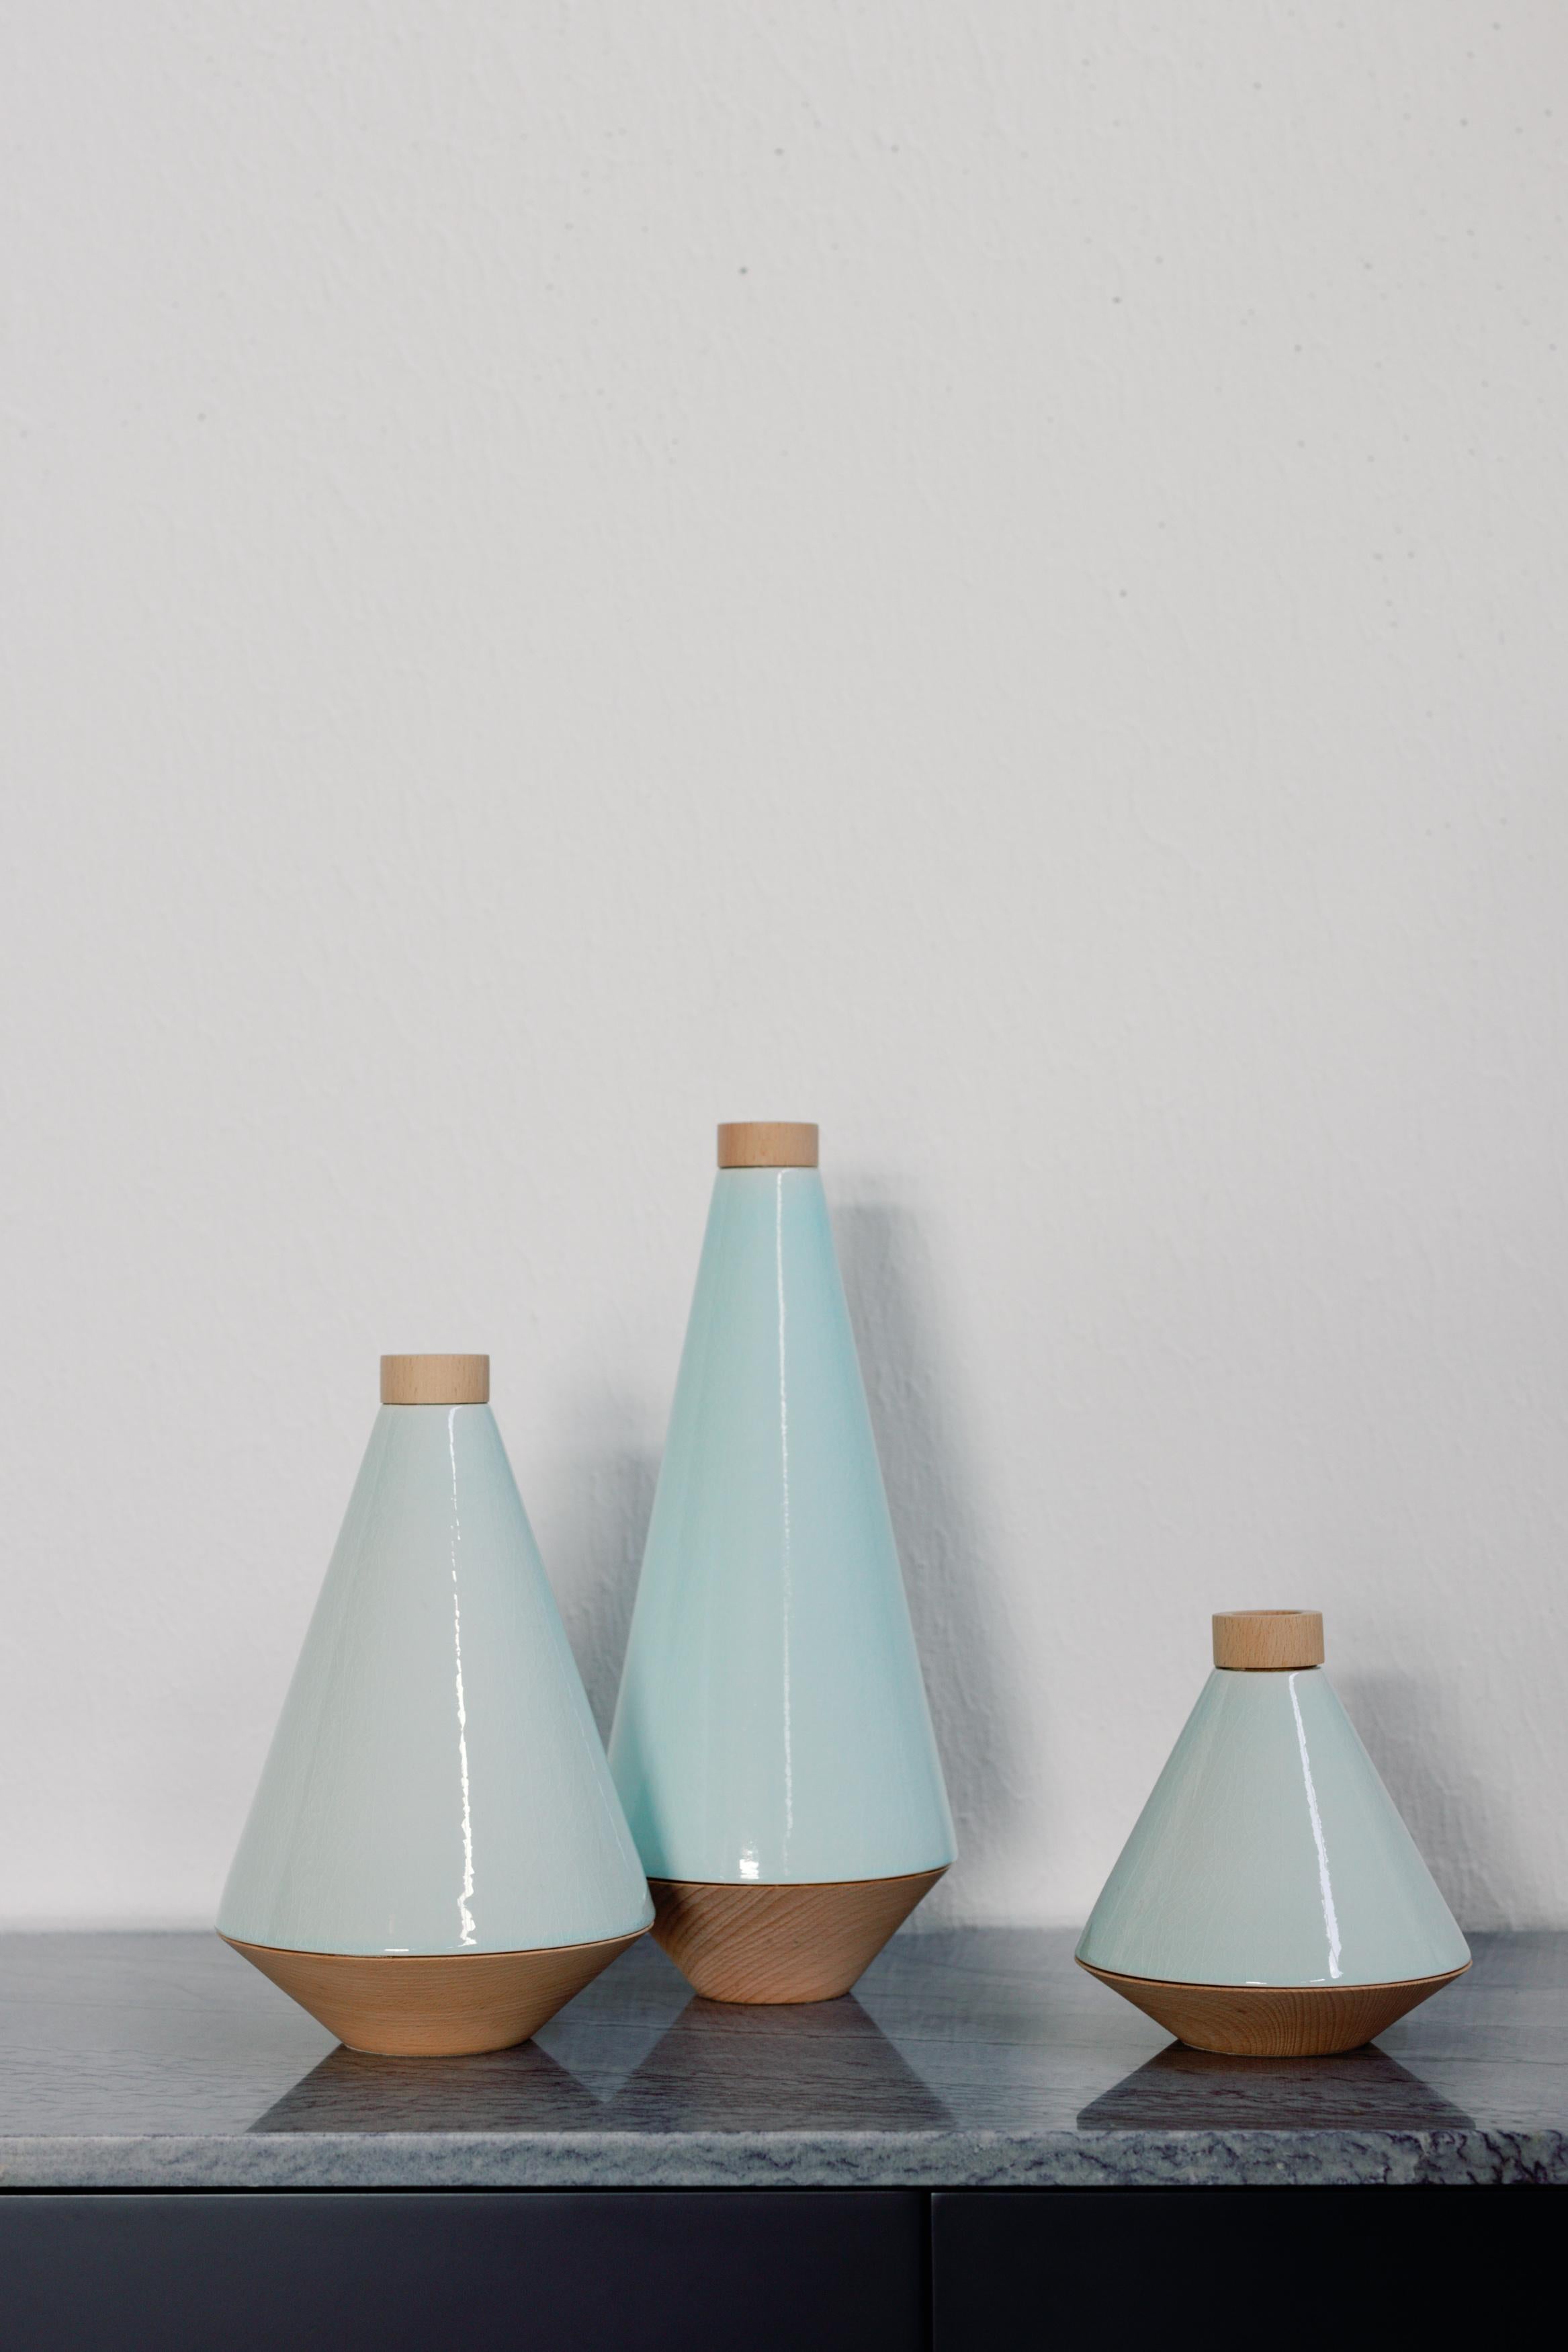 Set of 5 Chaucer Pots and Elliot Vases, Lusitanus Home Collection, Handcrafted in Portugal - Europe by Lusitanus Home.

This beautiful set includes five waterproof ceramic pots and vases, perfect to be displayed together and enrich your room decor.